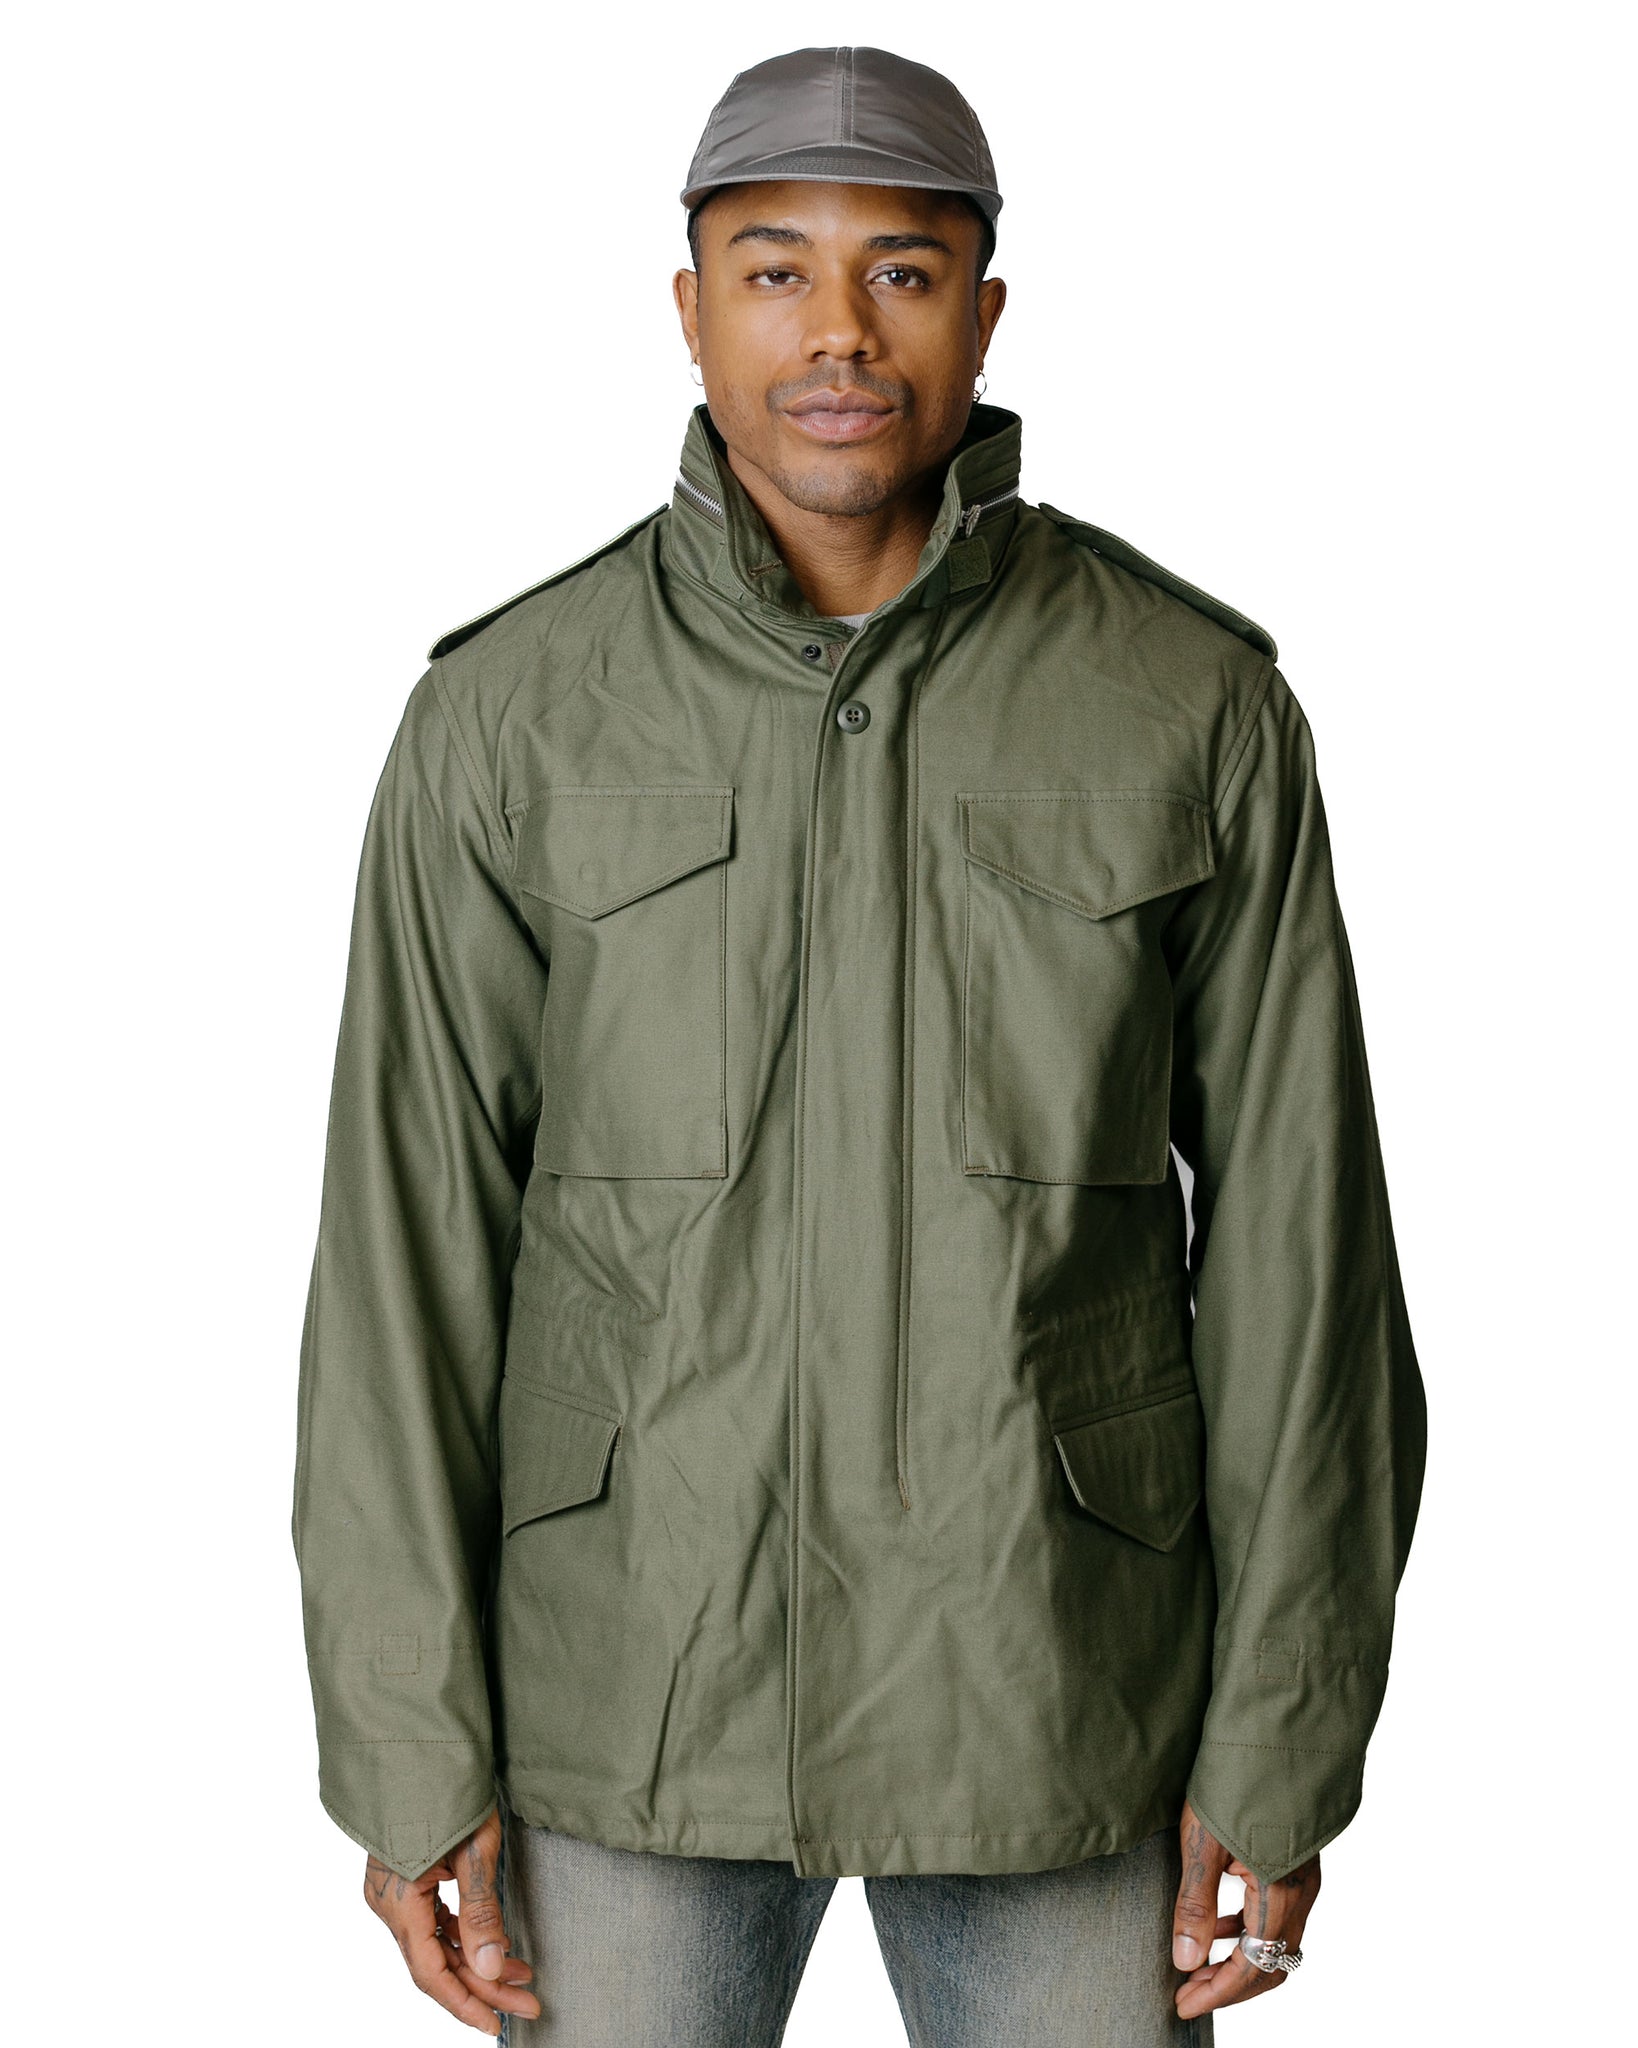 The Real McCoy's MJ22107 Coat, Man's, Field, M-65 Olive model front